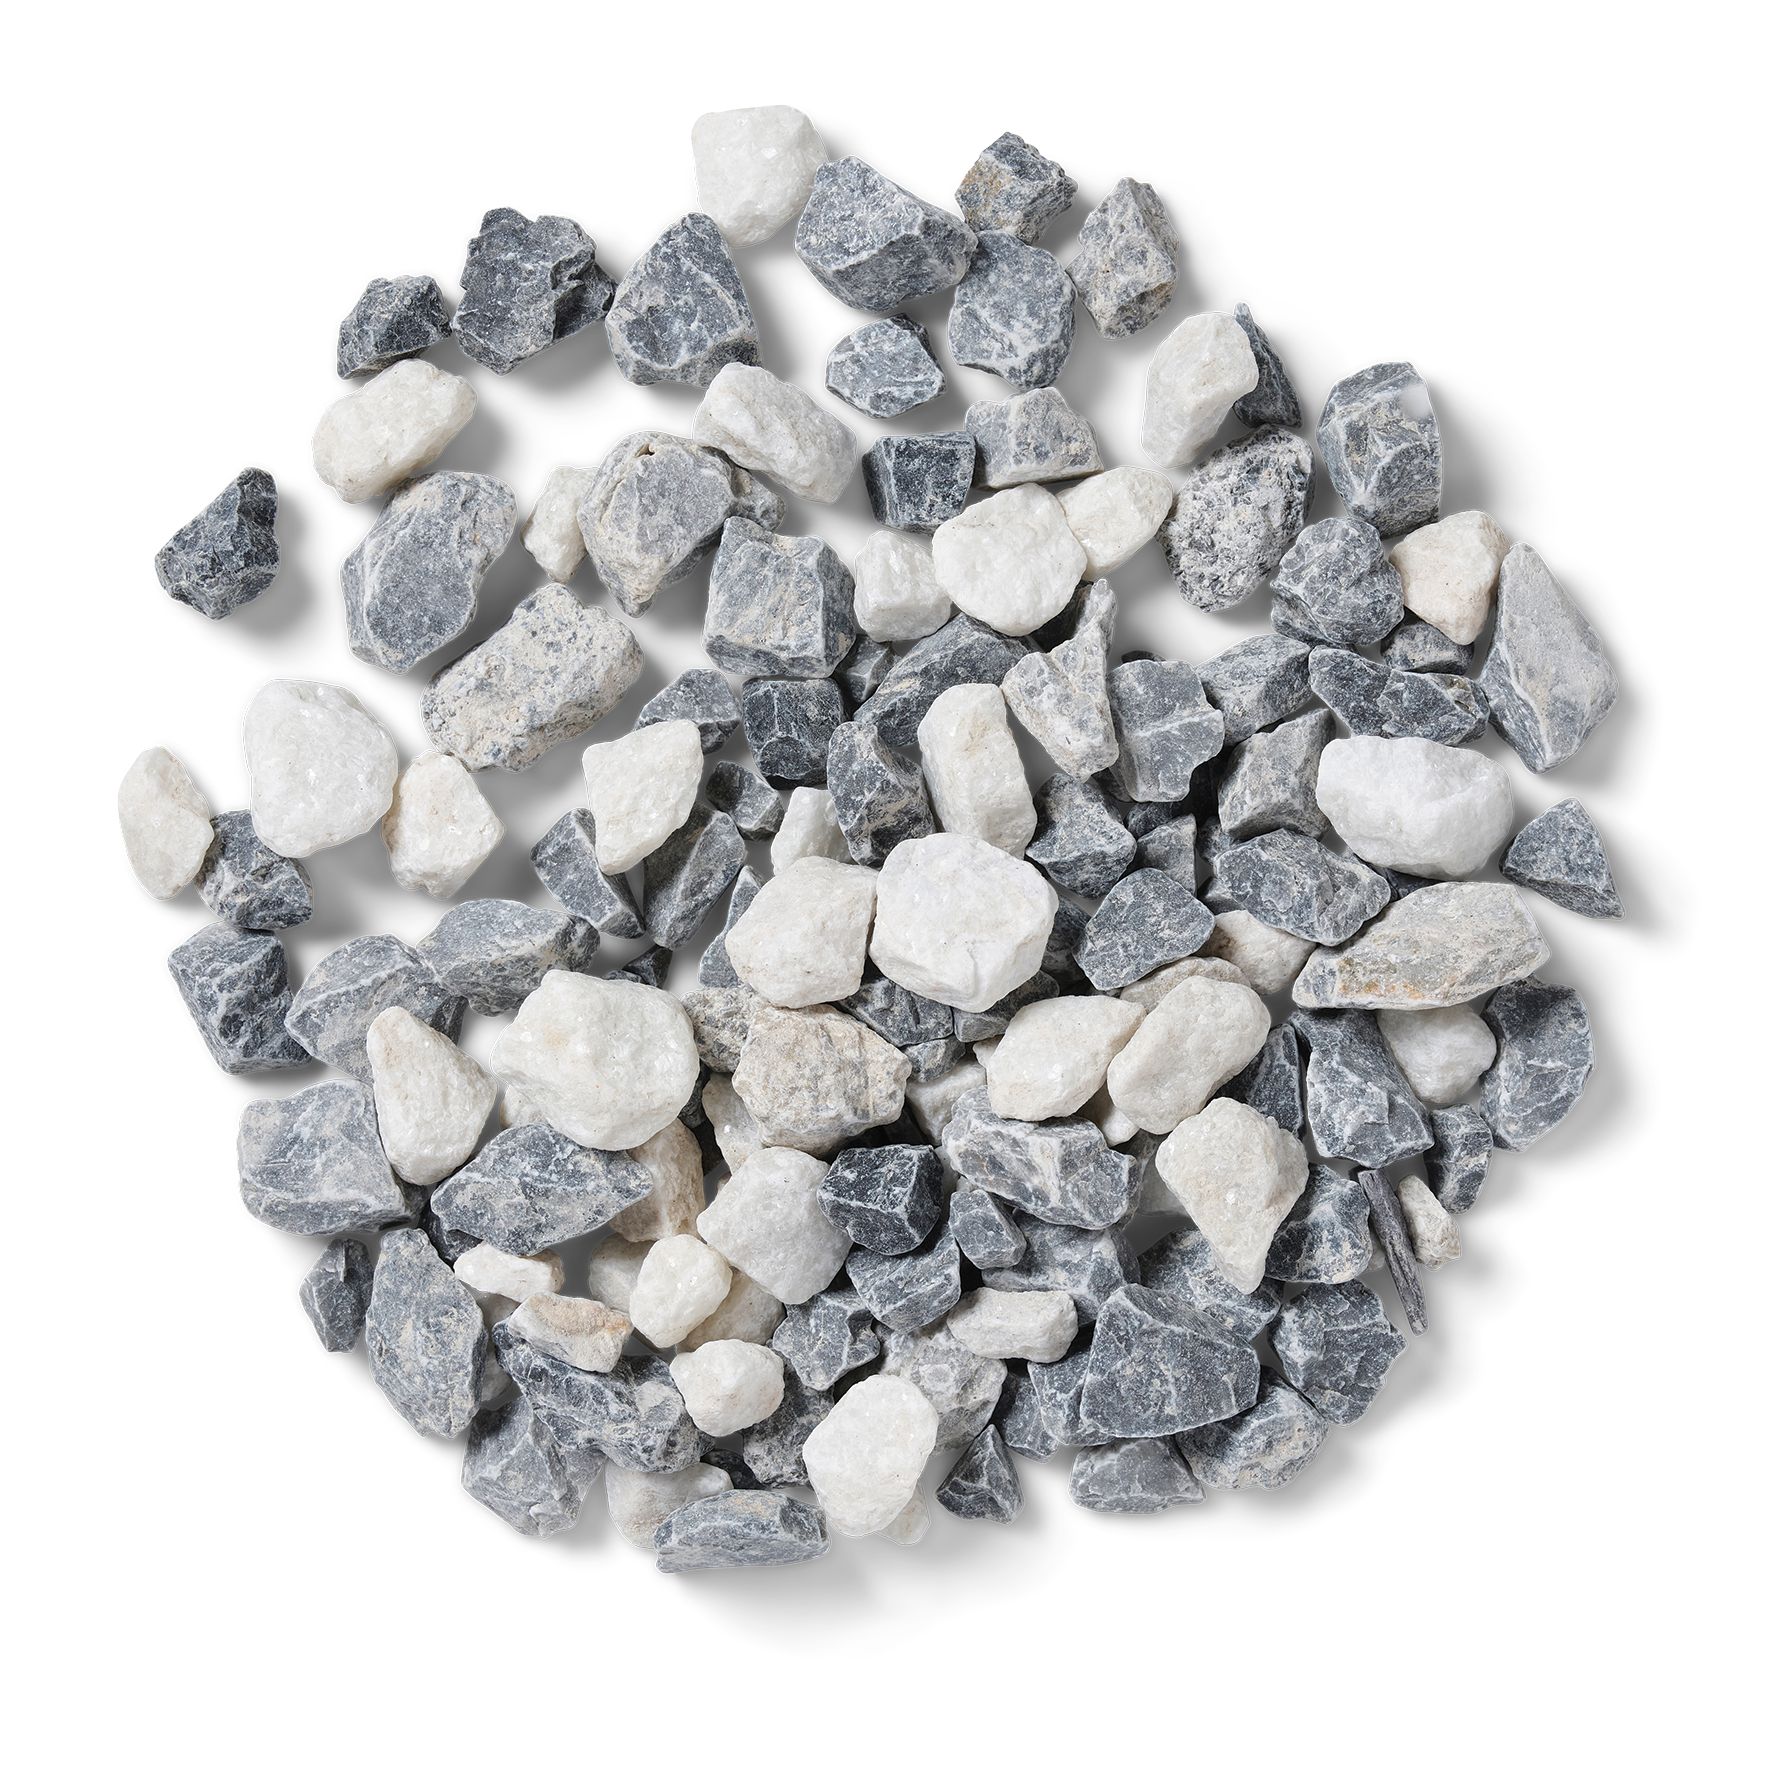 Aspects 35mm Natural aggregate Decorative chippings, Large Bag